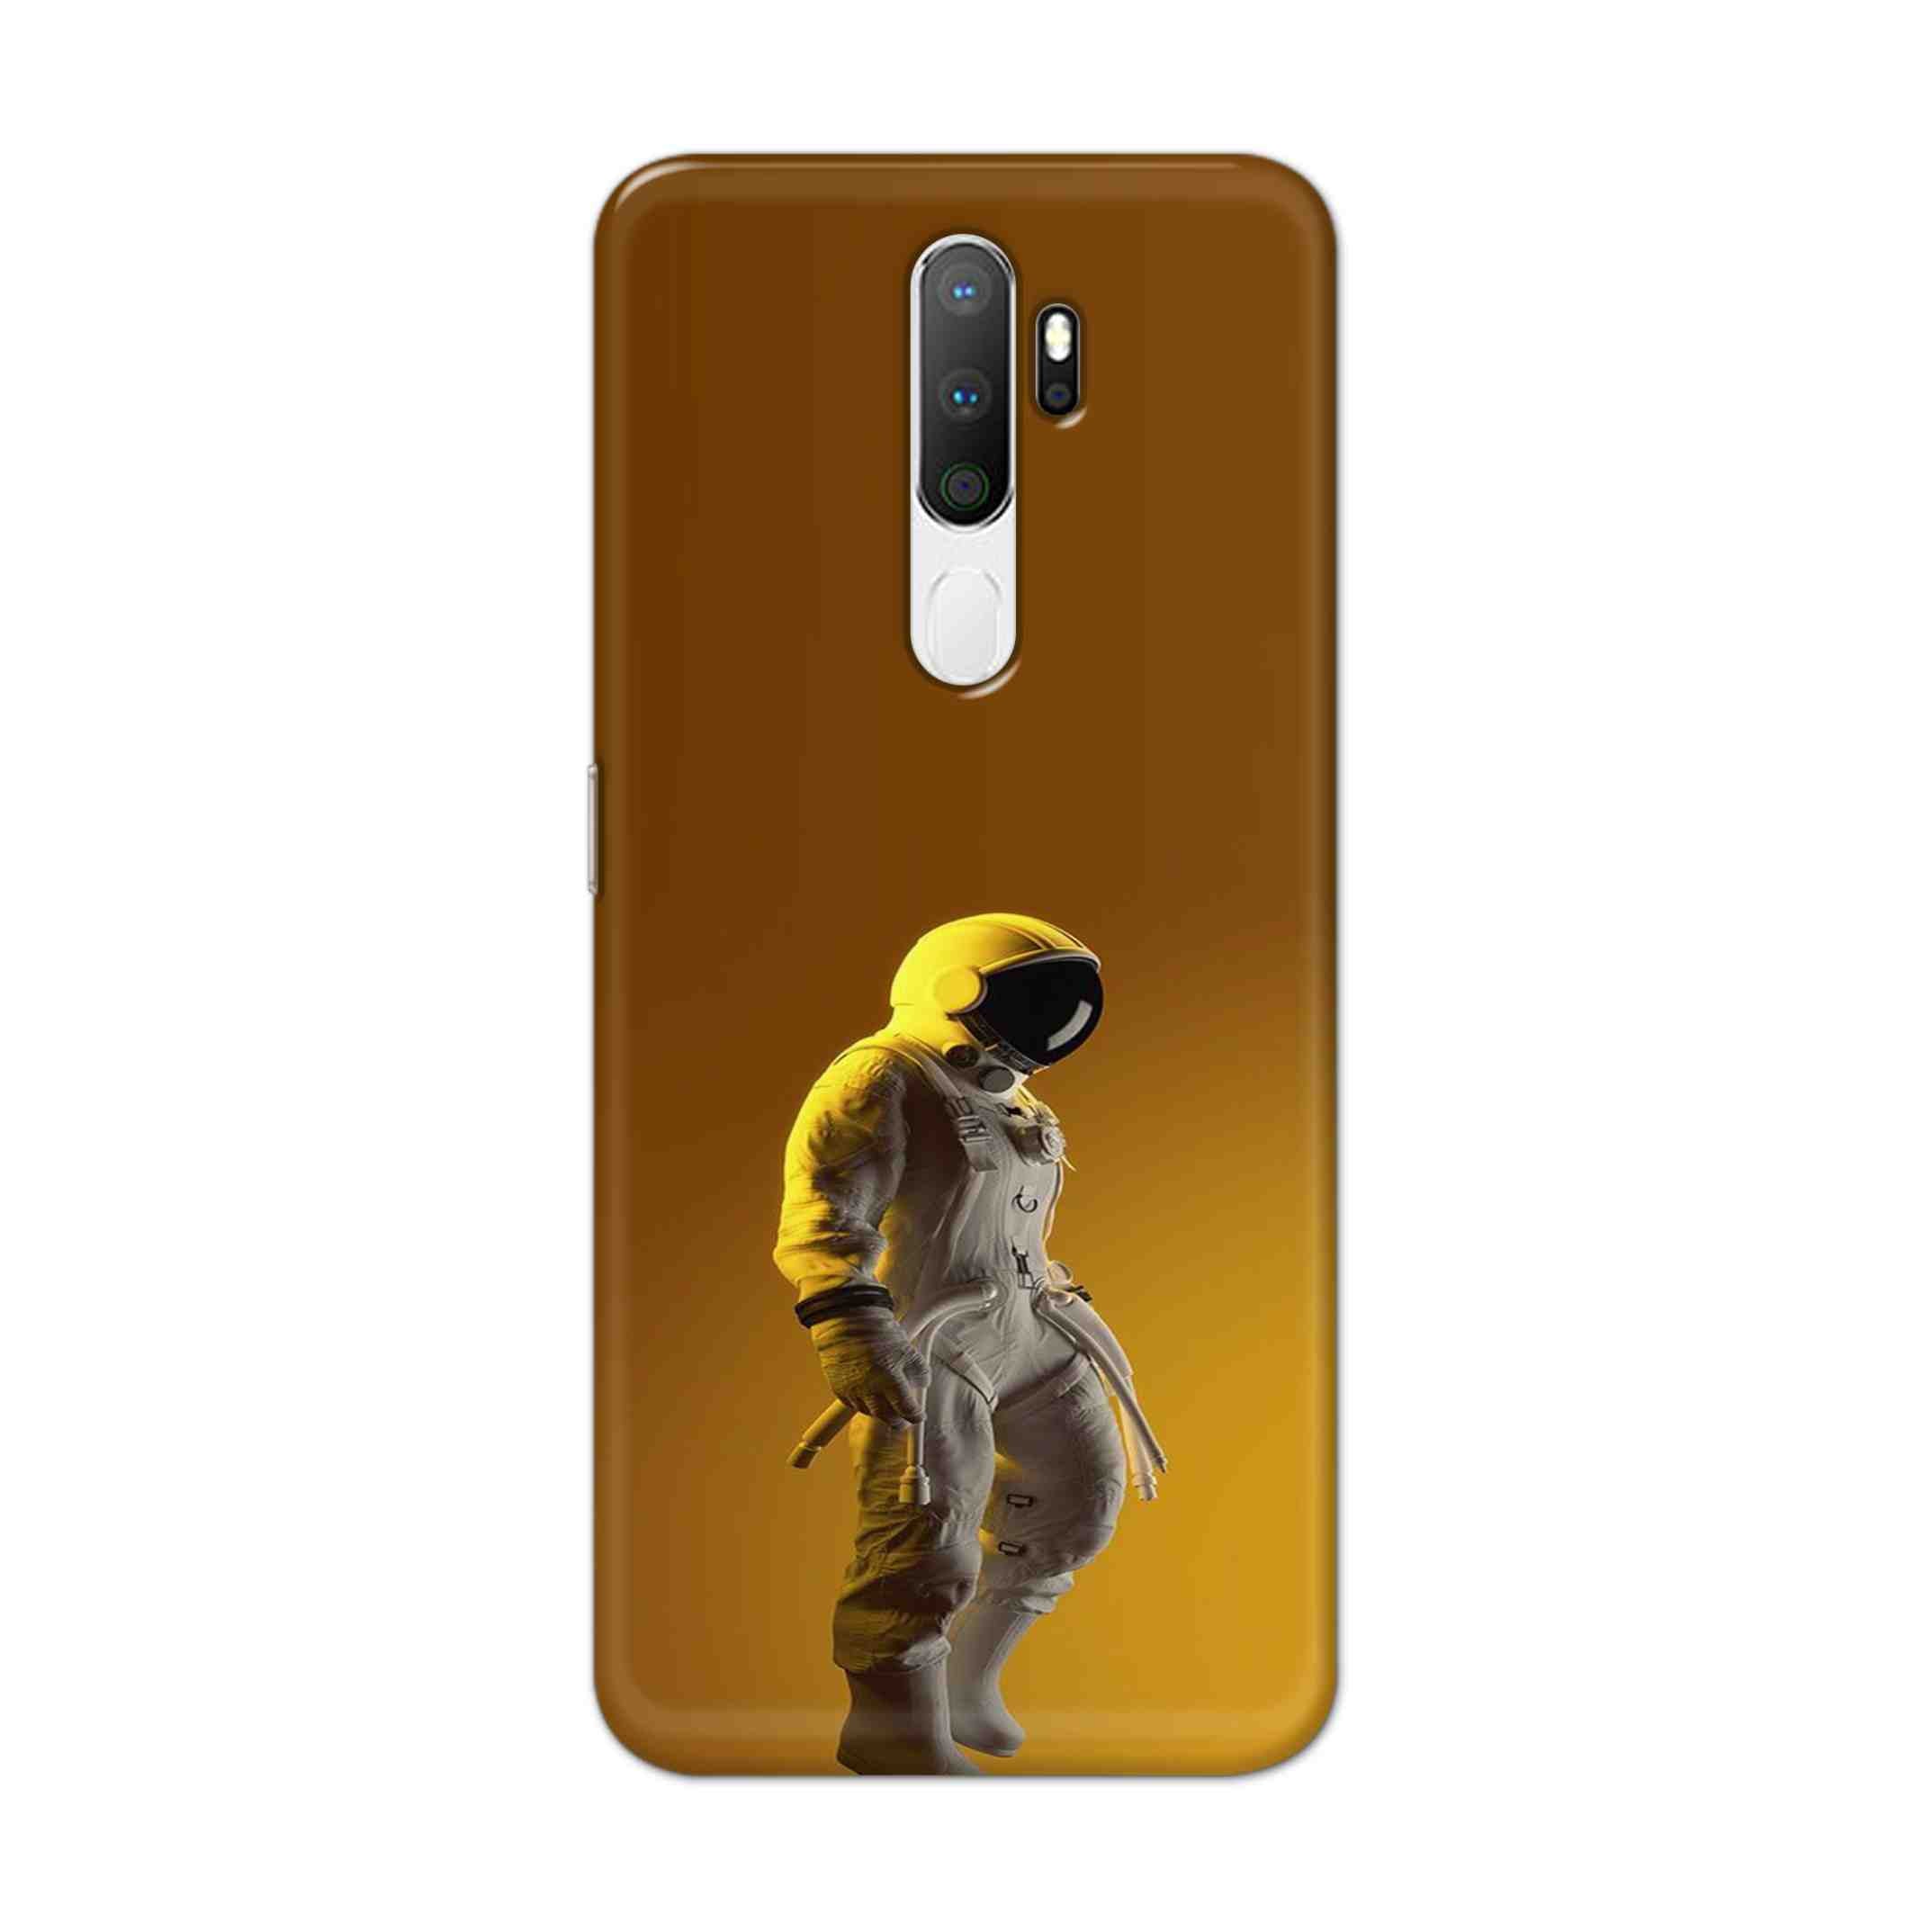 Buy Yellow Astronaut Hard Back Mobile Phone Case Cover For Oppo A5 (2020) Online